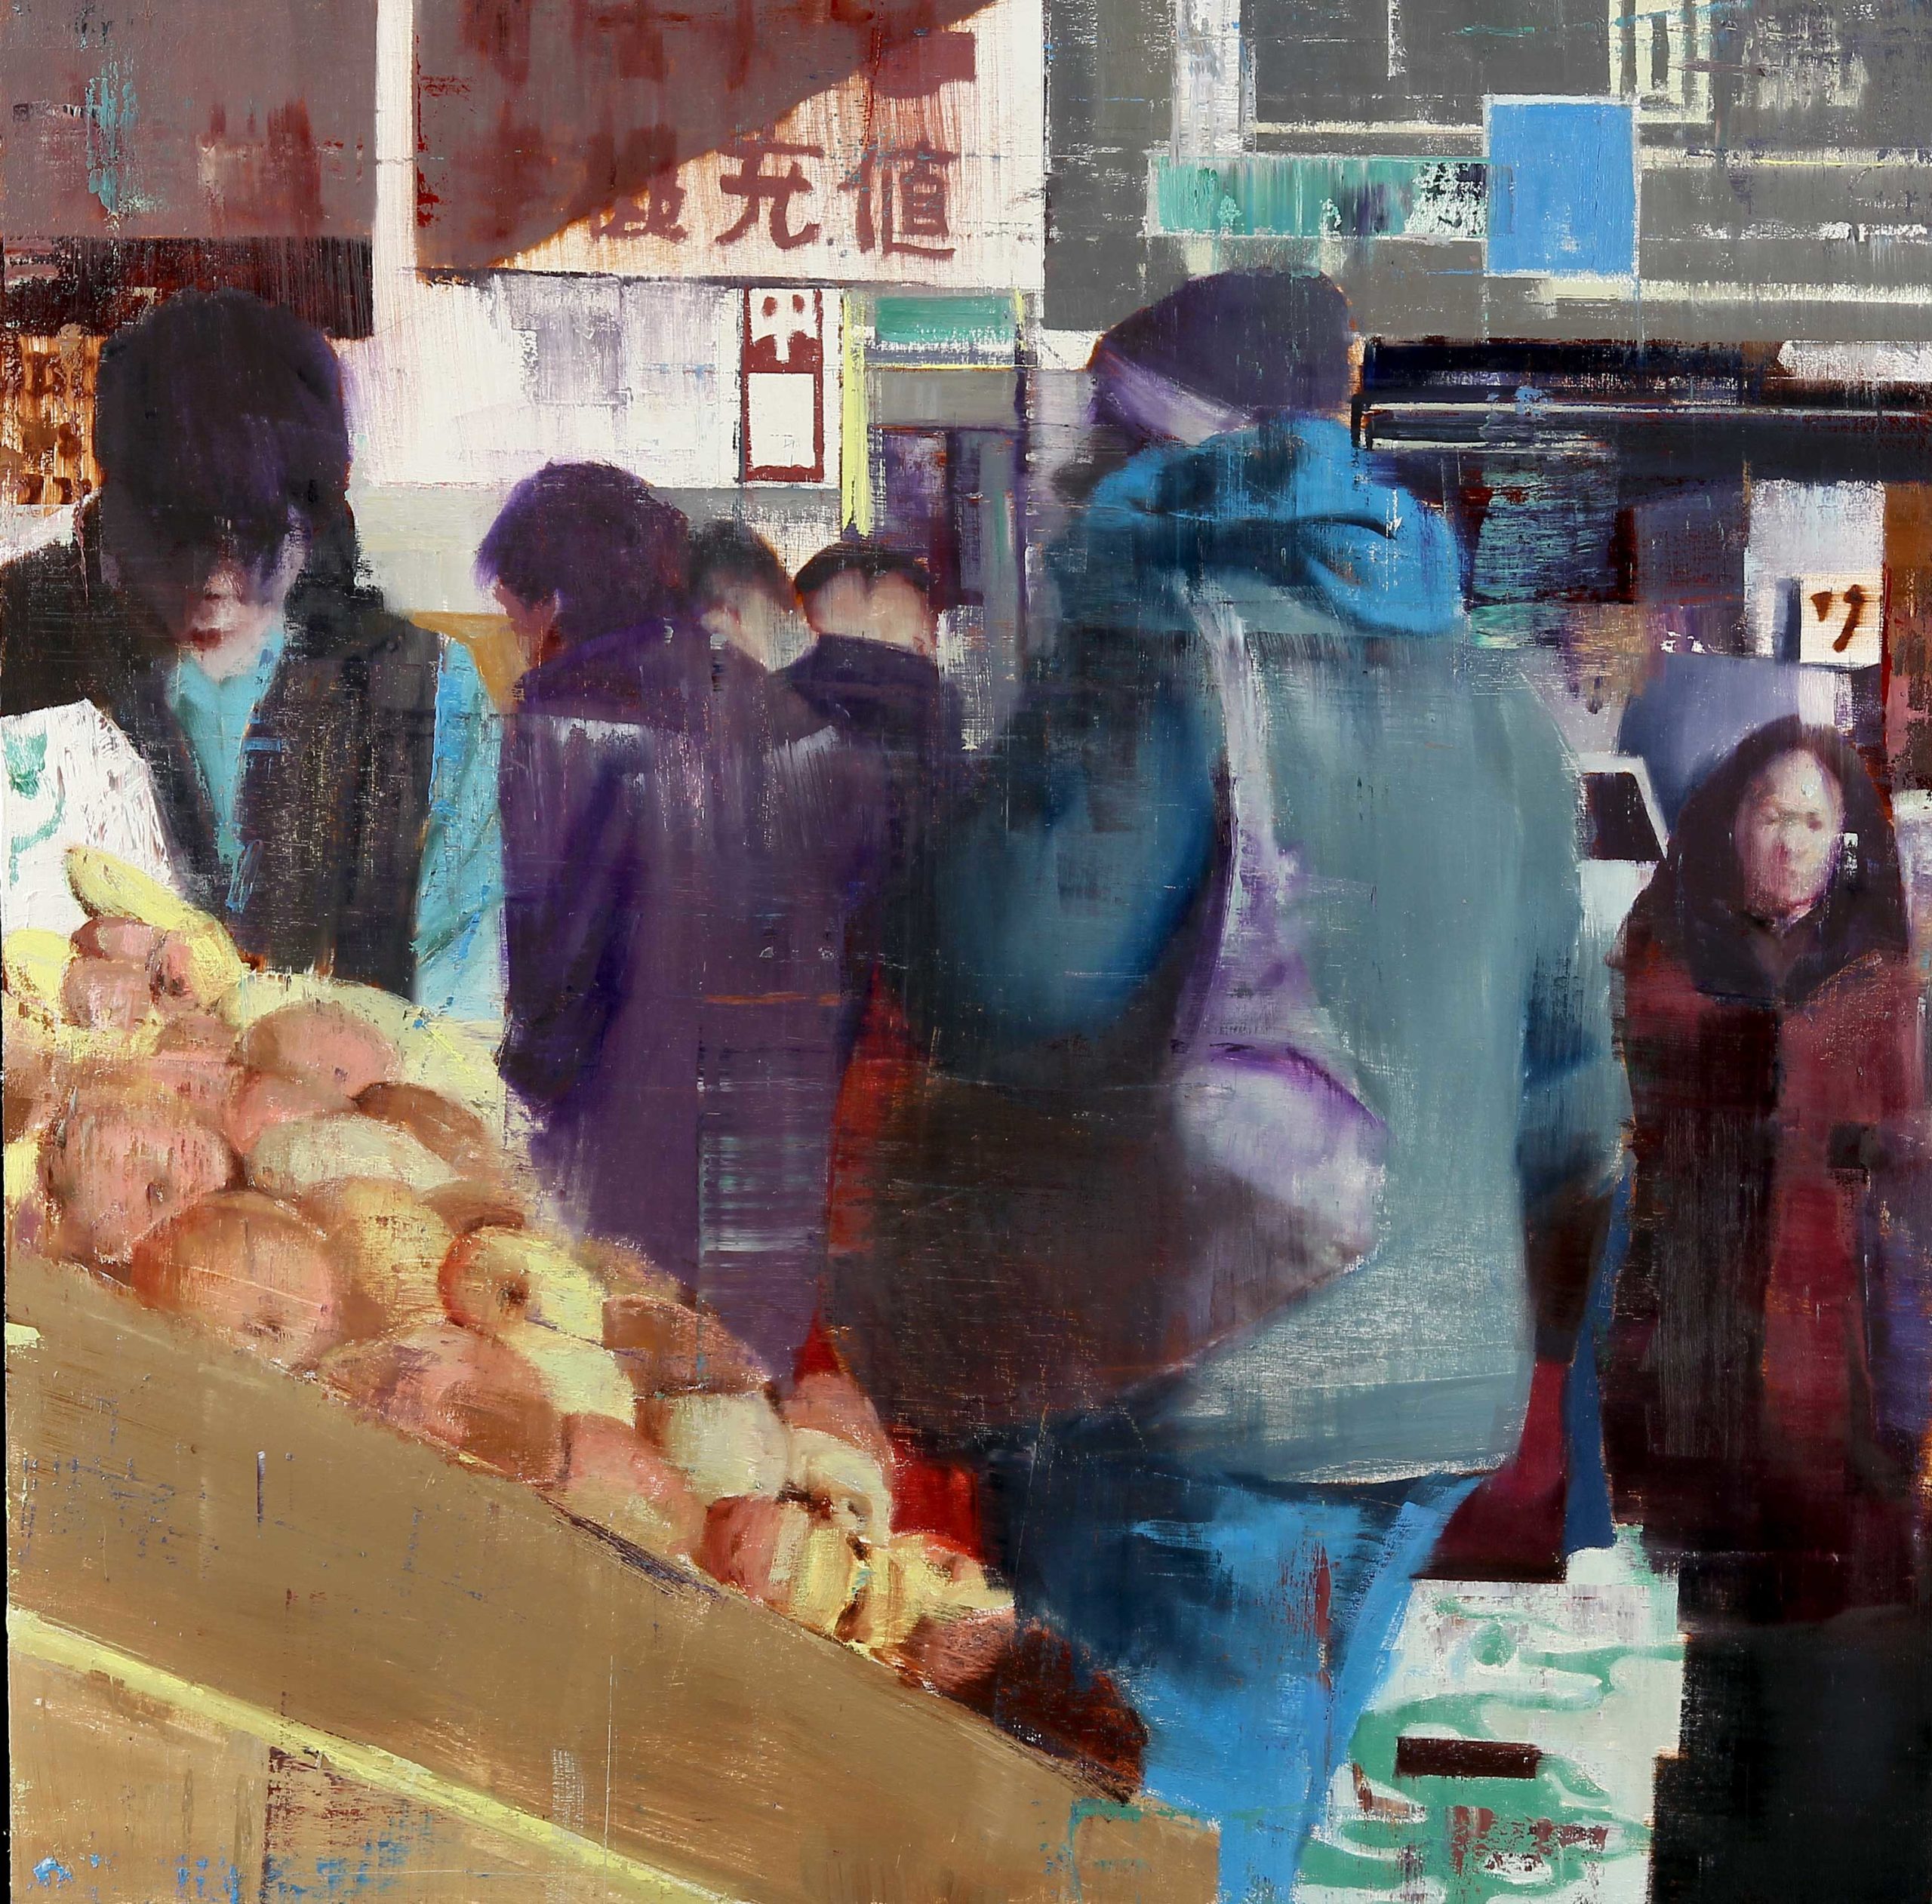 Brett Amory, "Flushing, Queens 9-10am (Waiting #179)," 36 x 36 inches, Oil on wood